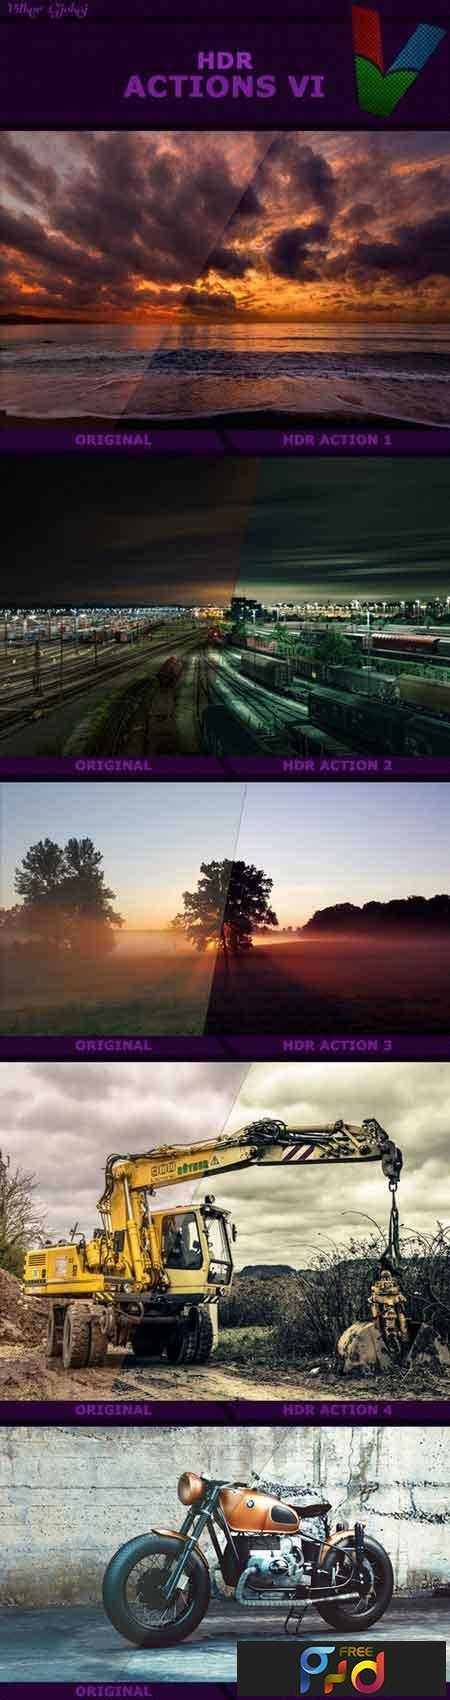 HDR Actions VI